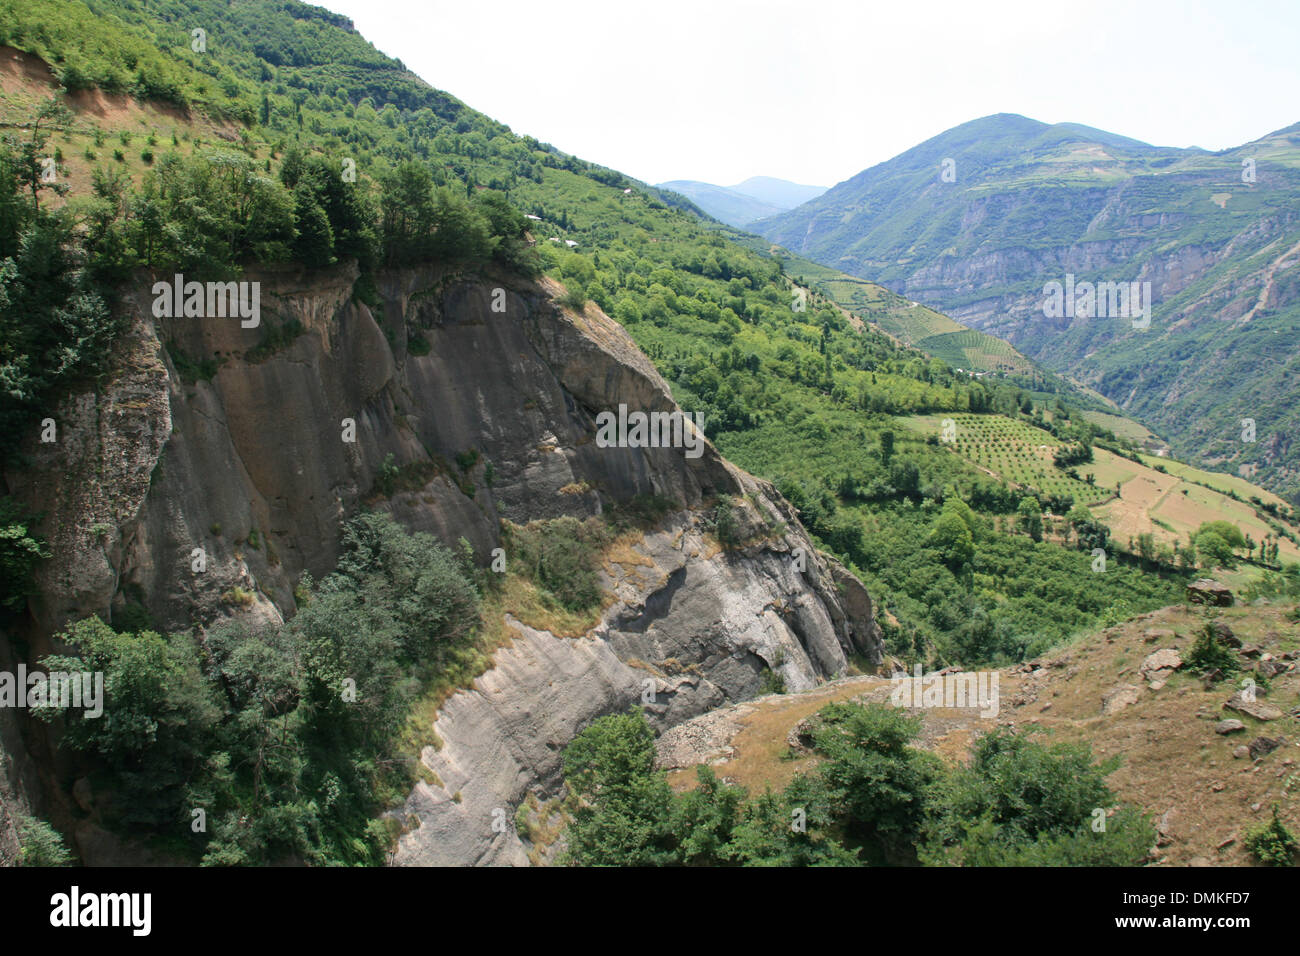 Continous Green Mountains.Kakroud,Gilan Province,Iran,Middle East,Asia Stock Photo